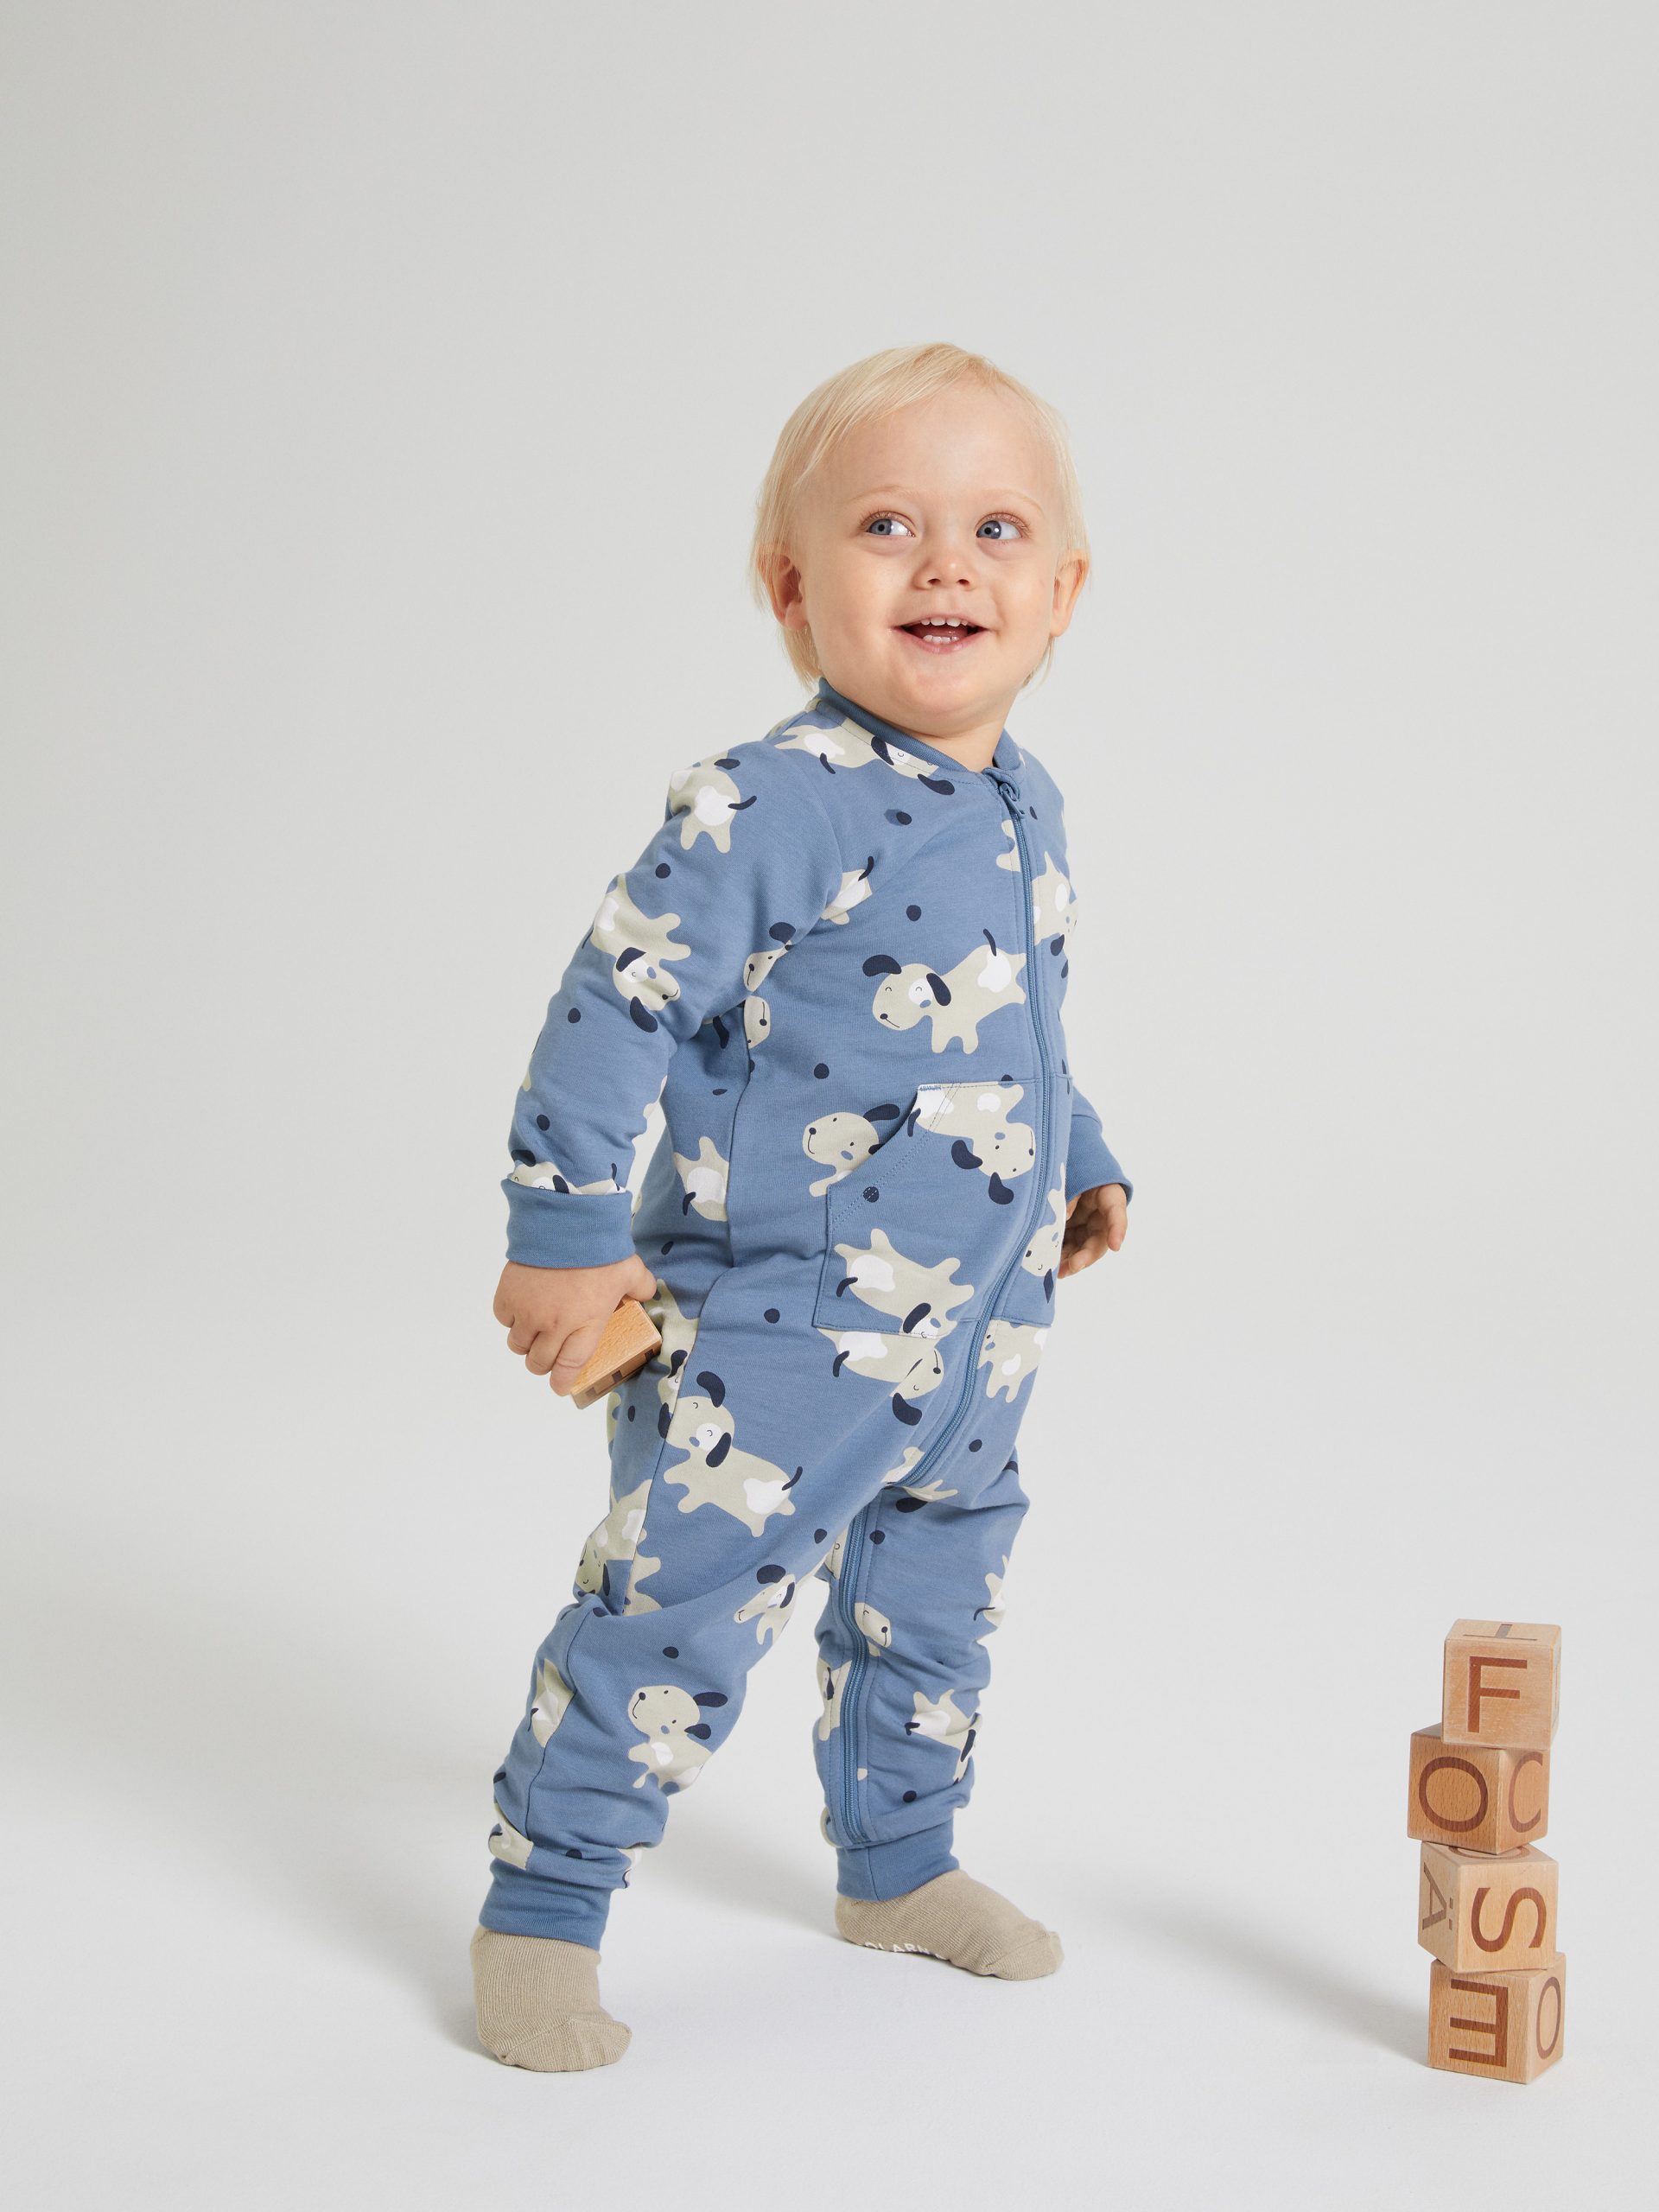 Kidswear: New Garden of Delights Spring Collection by PO.P’s